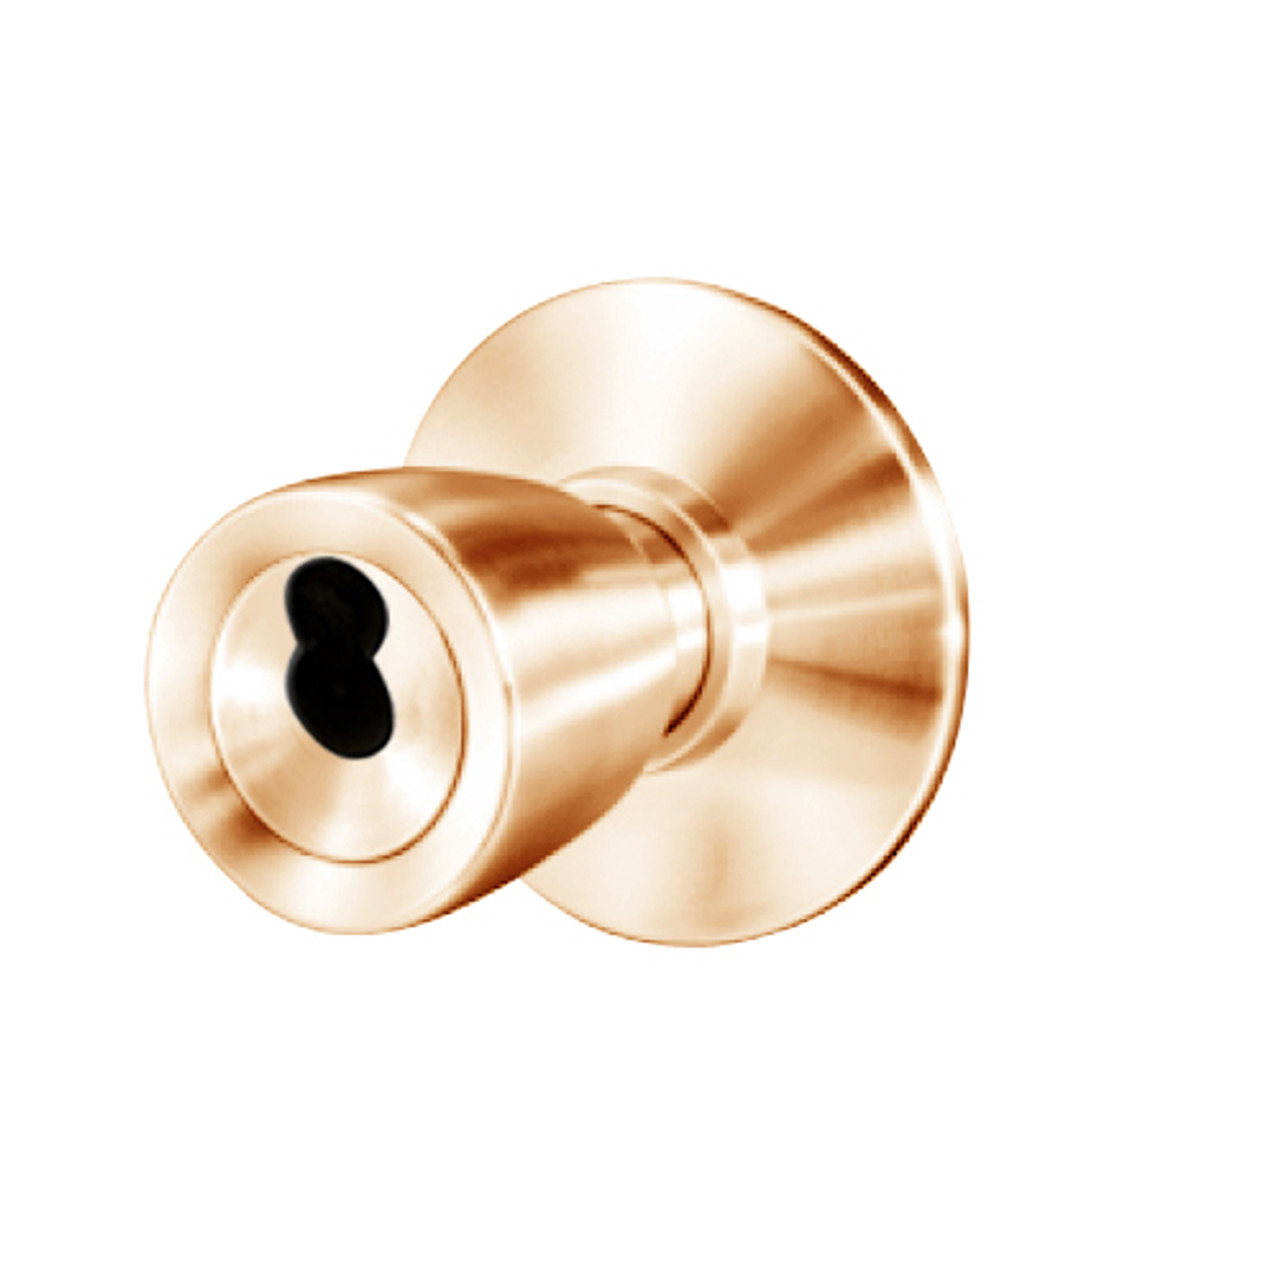 8K37C6DS3612 Best 8K Series Apartment Heavy Duty Cylindrical Knob Locks with Tulip Style in Satin Bronze